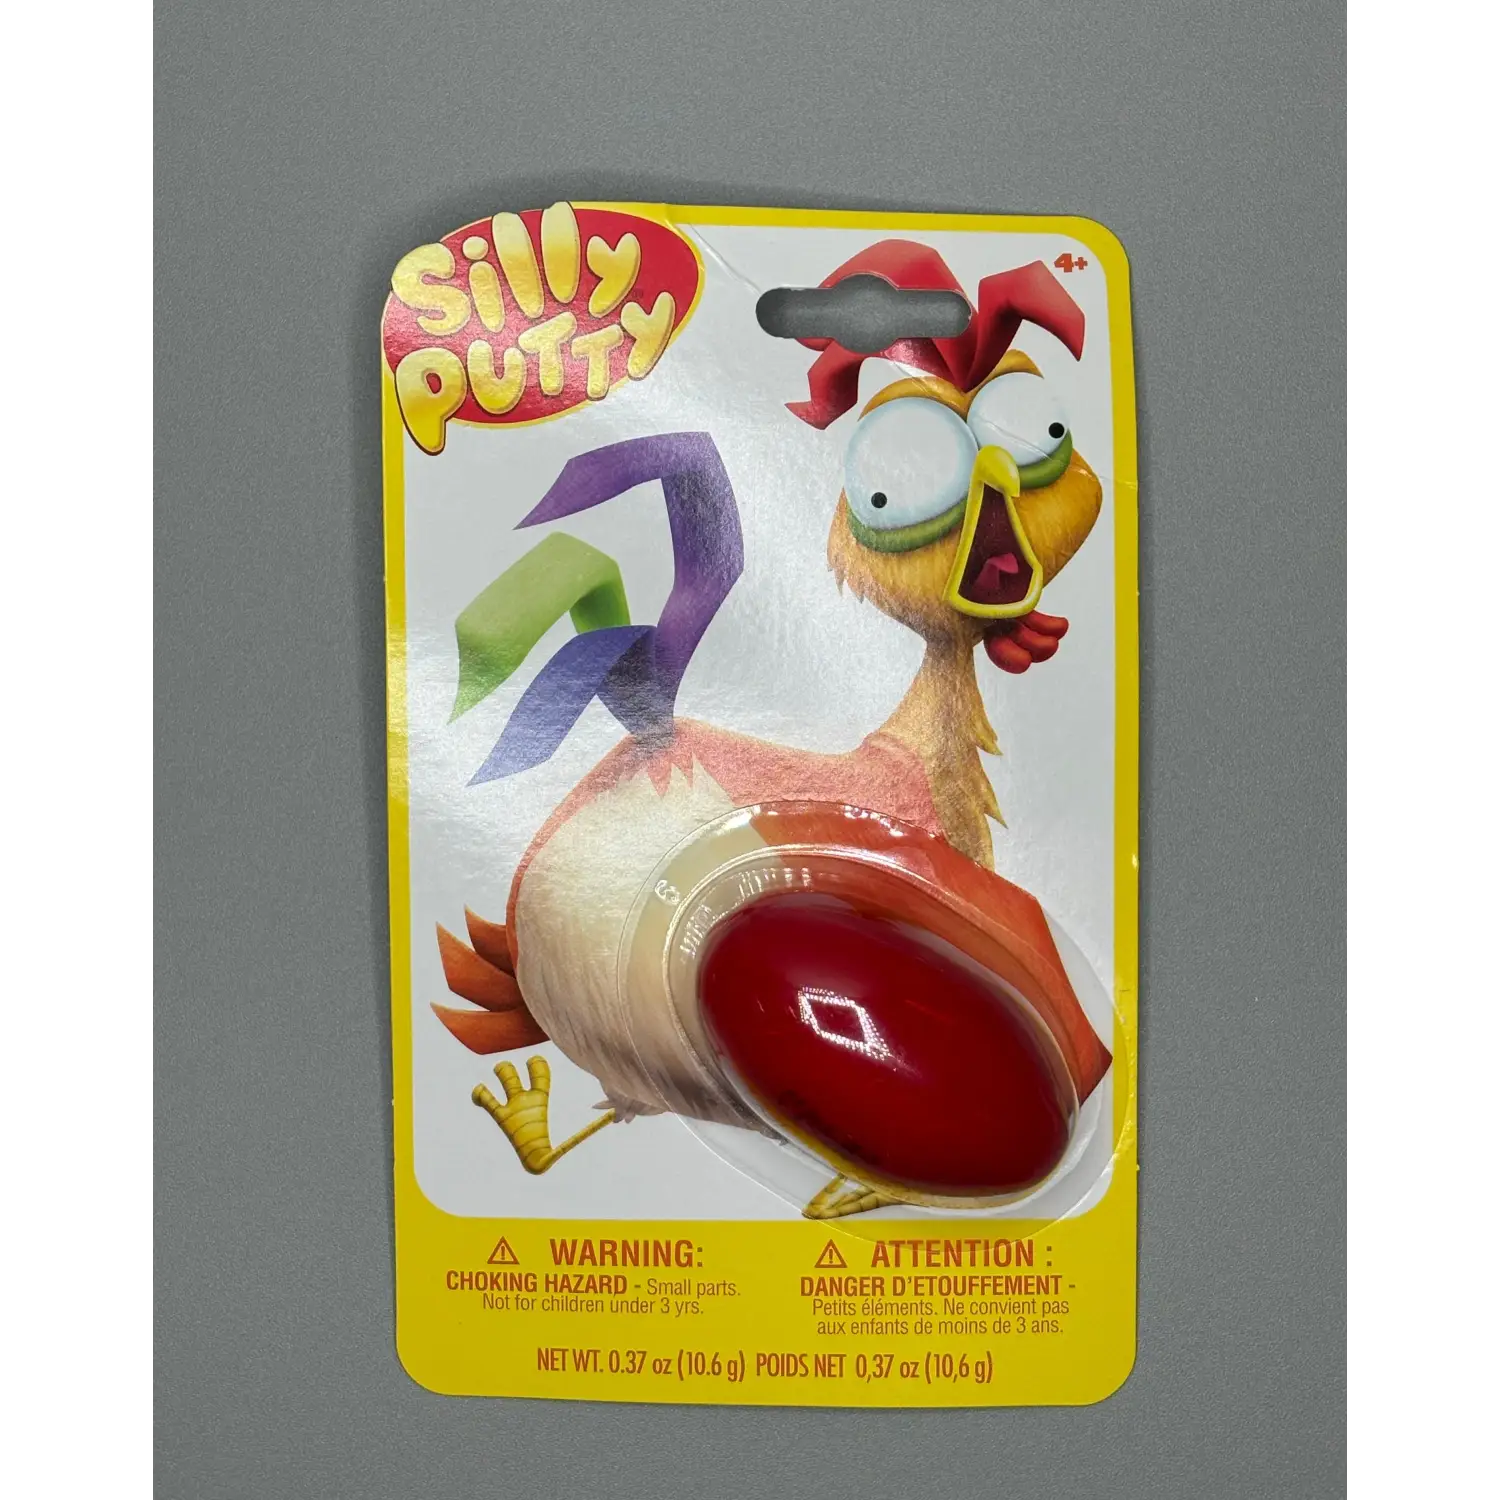 Classic Silly Putty